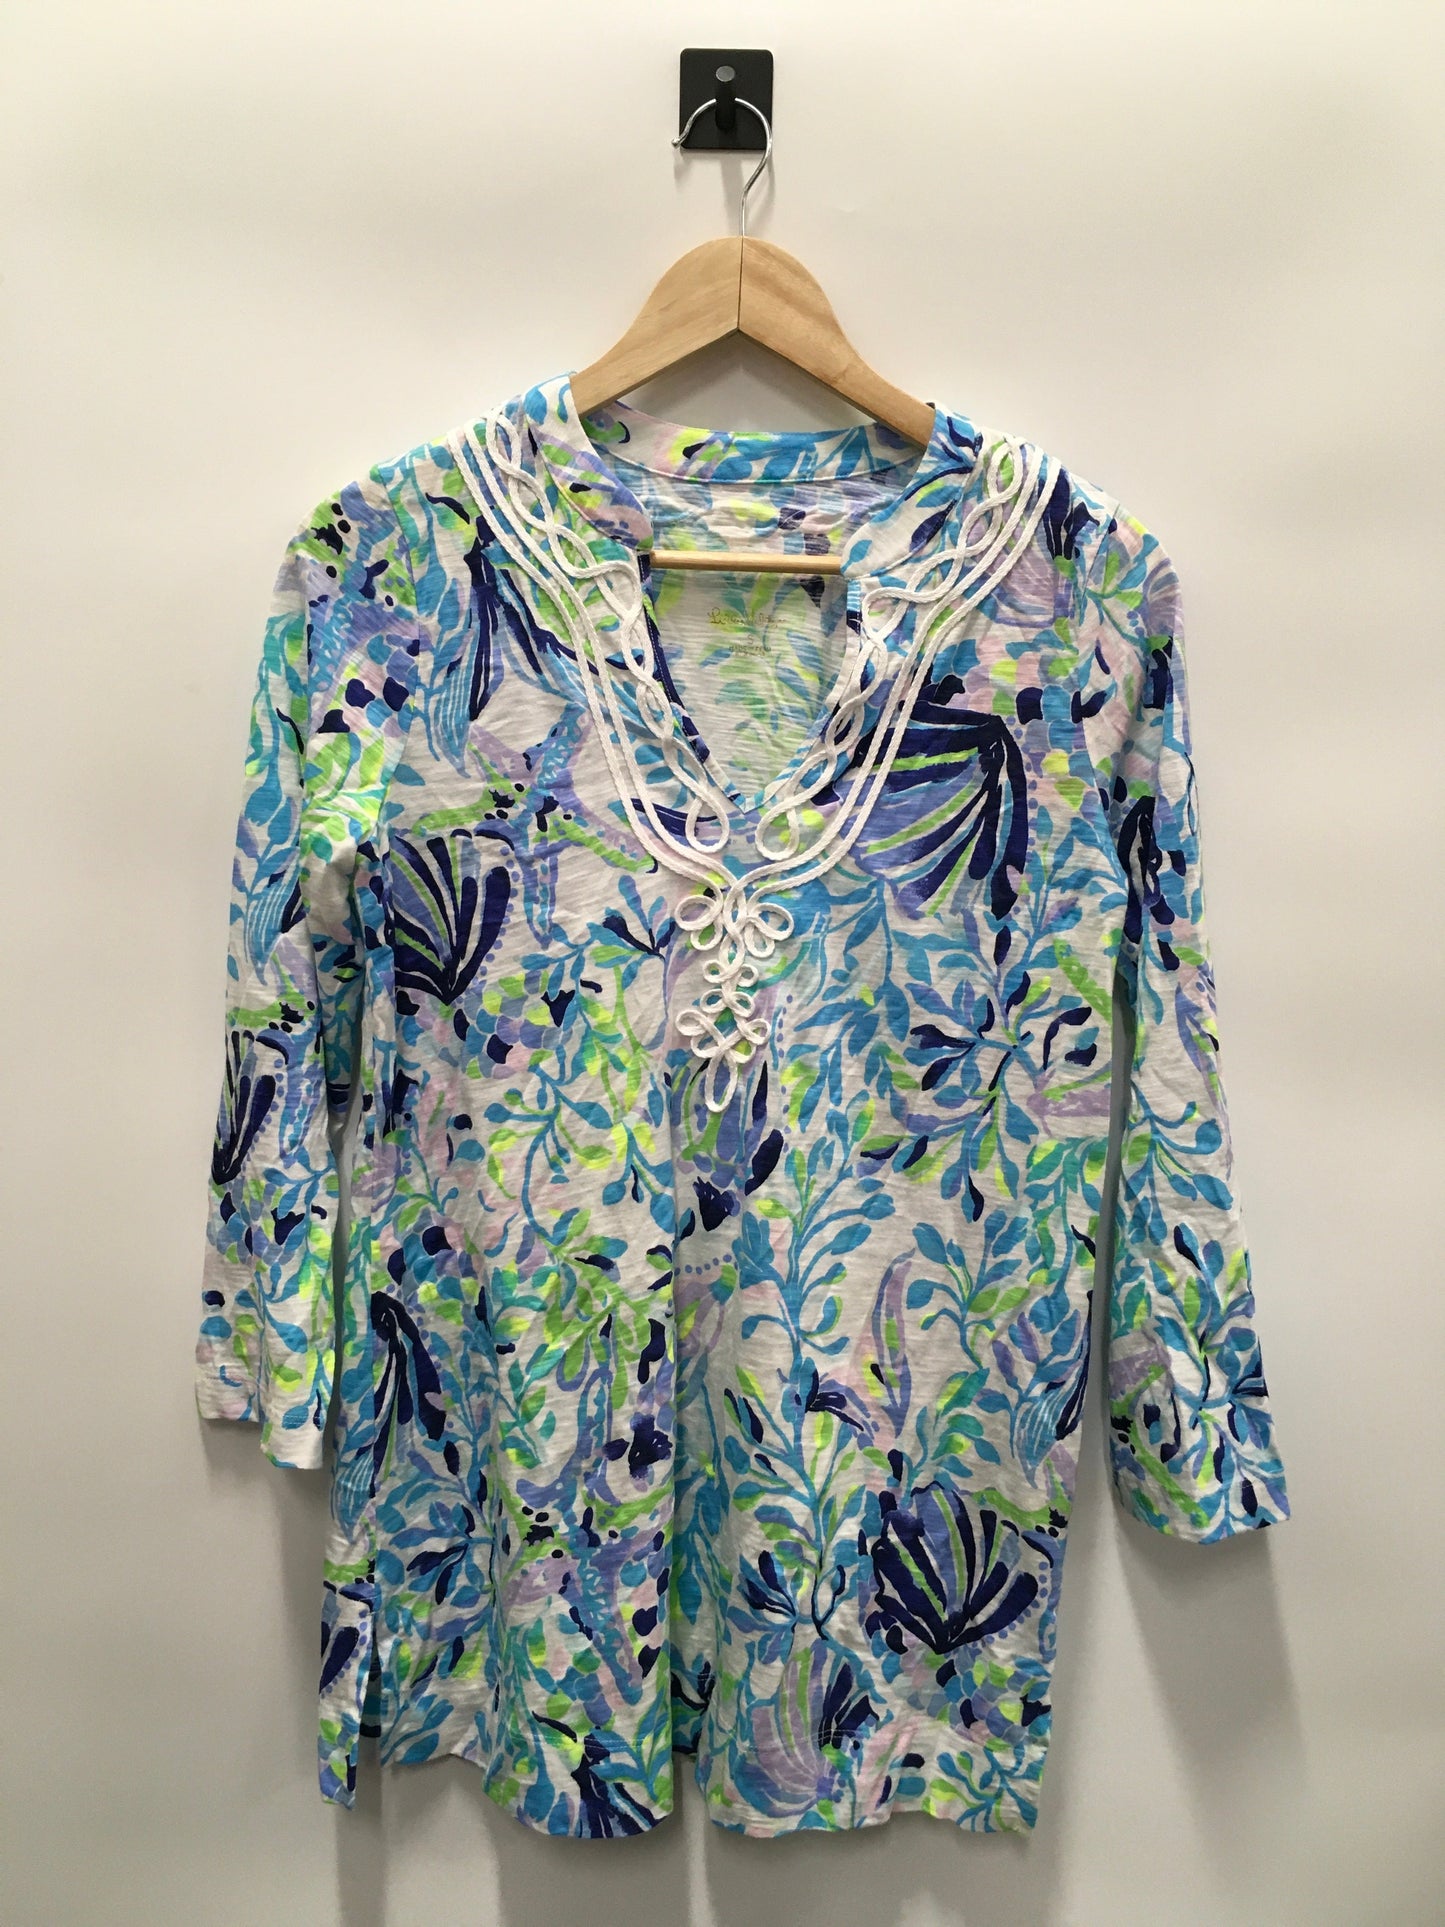 Blue & Green Top Long Sleeve Lilly Pulitzer, Size S